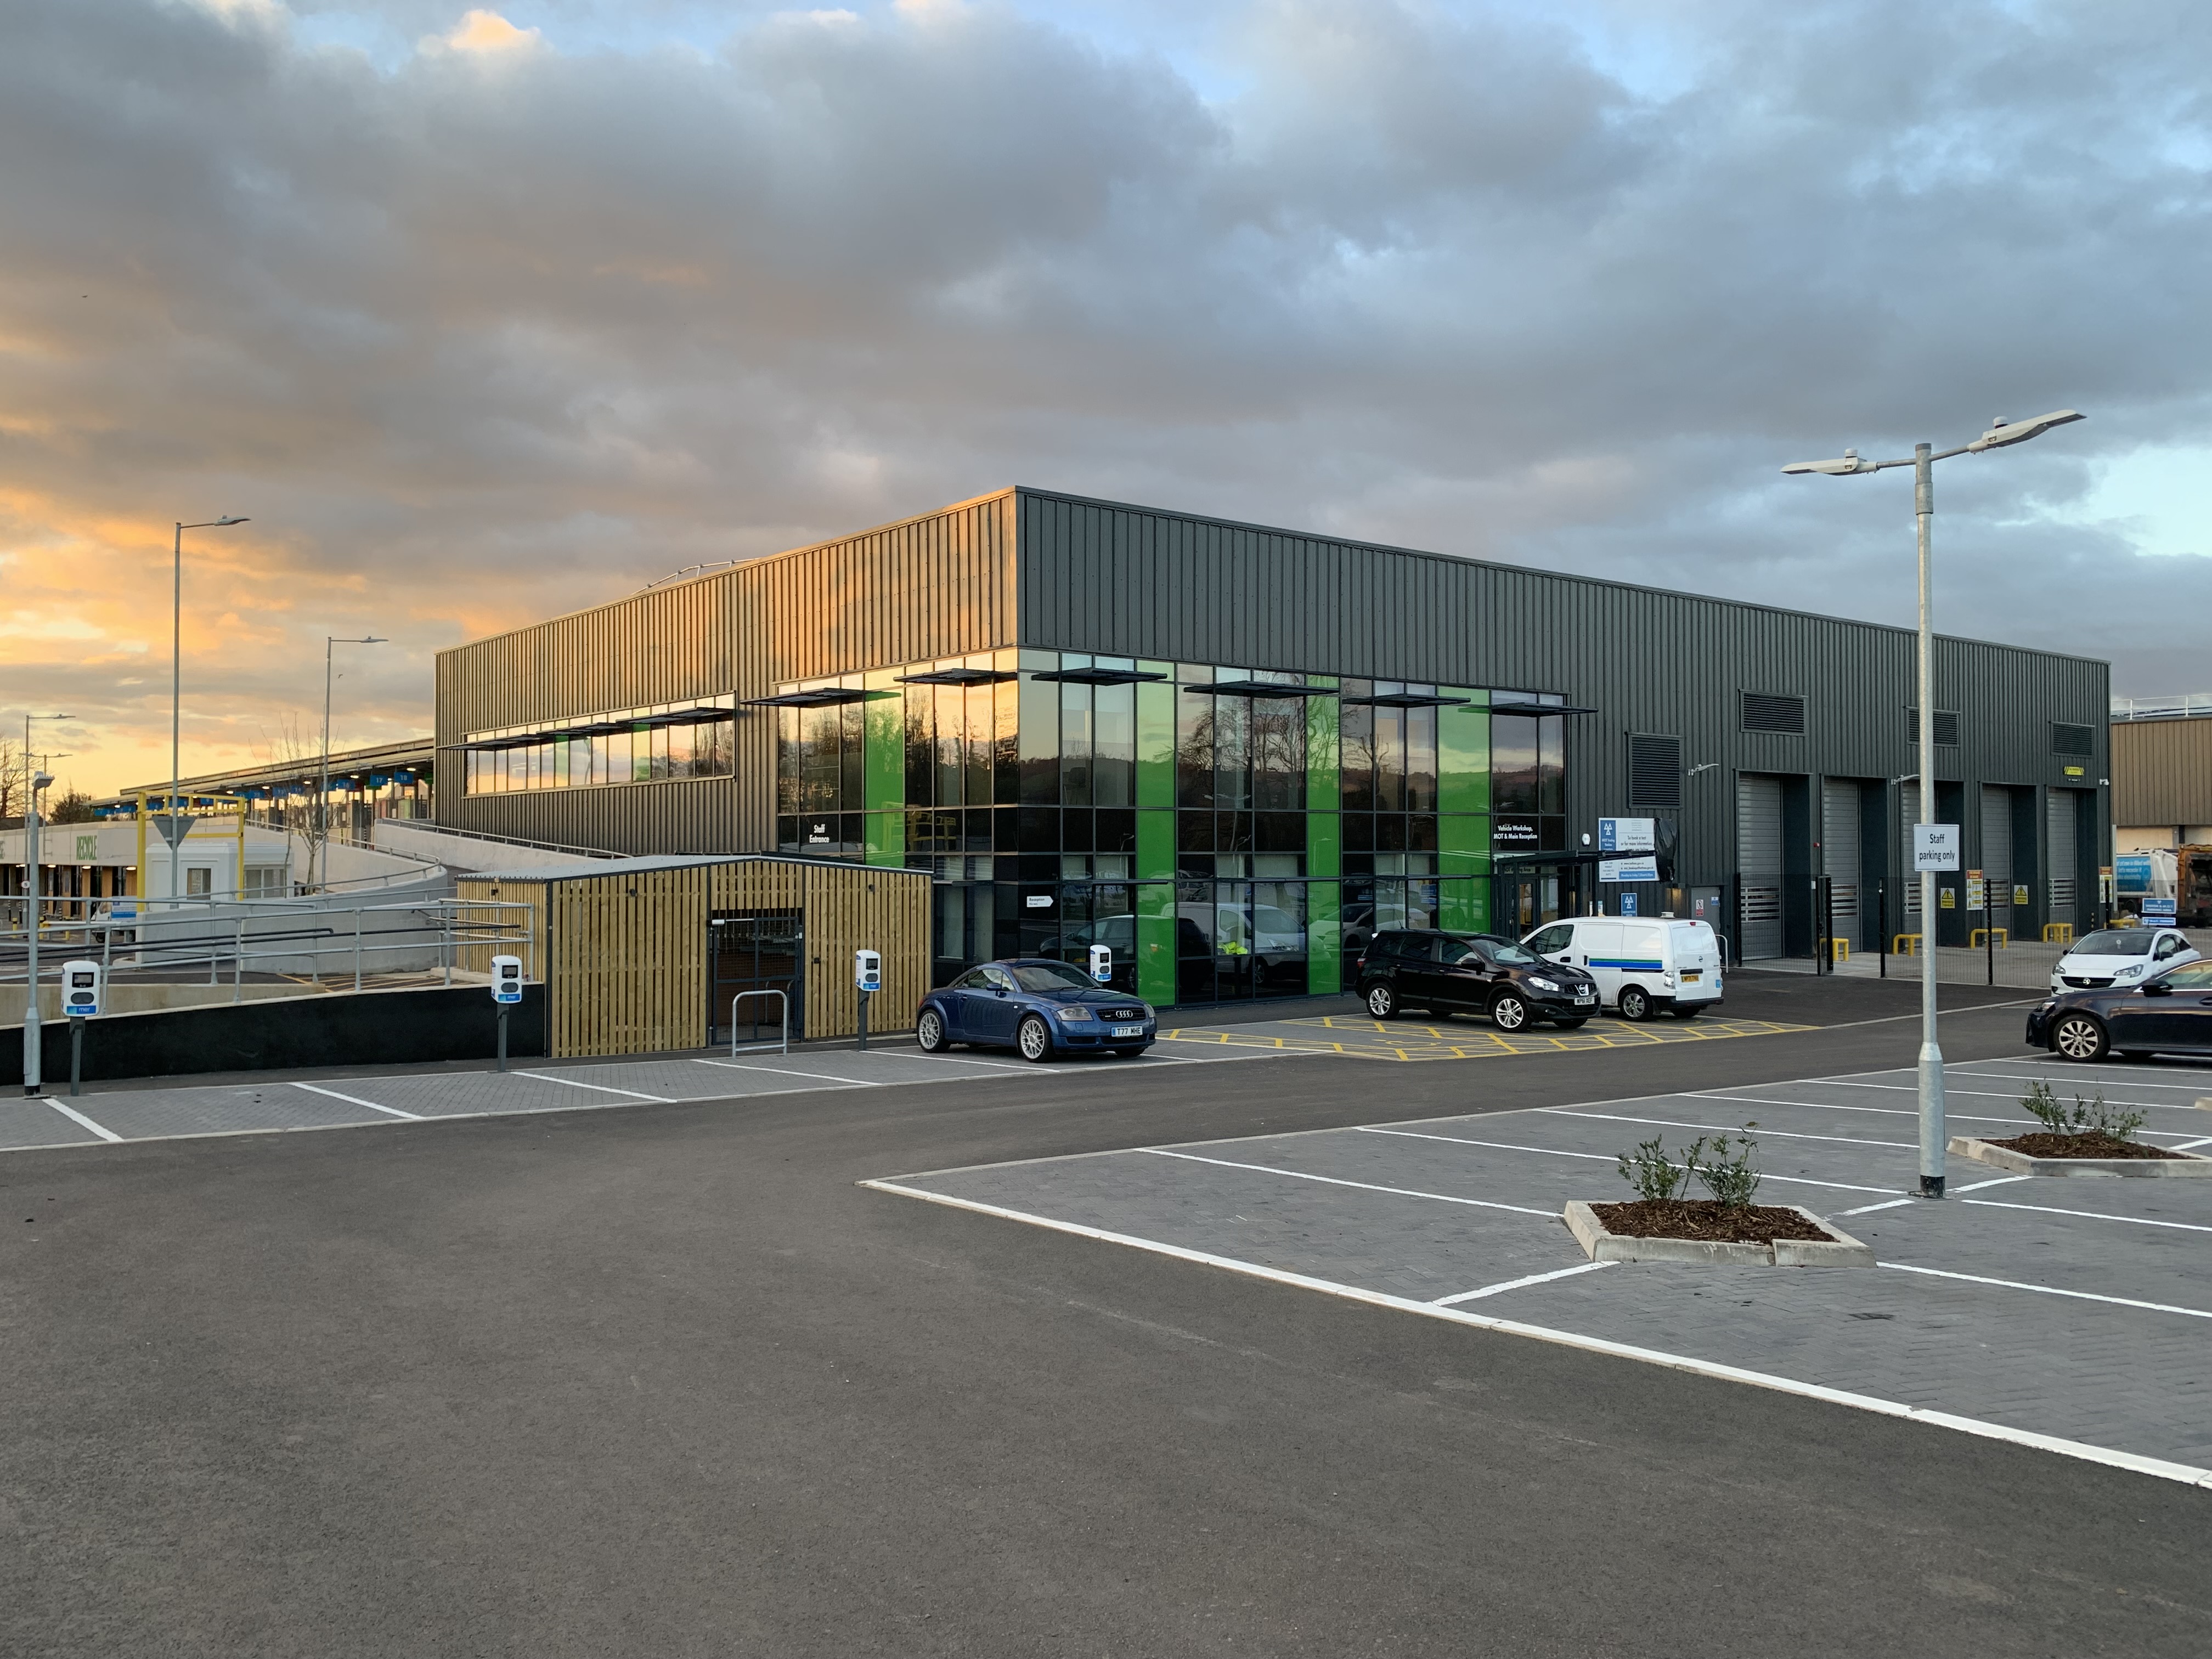 A picture of the office buildings at the Keynsham Recycling Hub